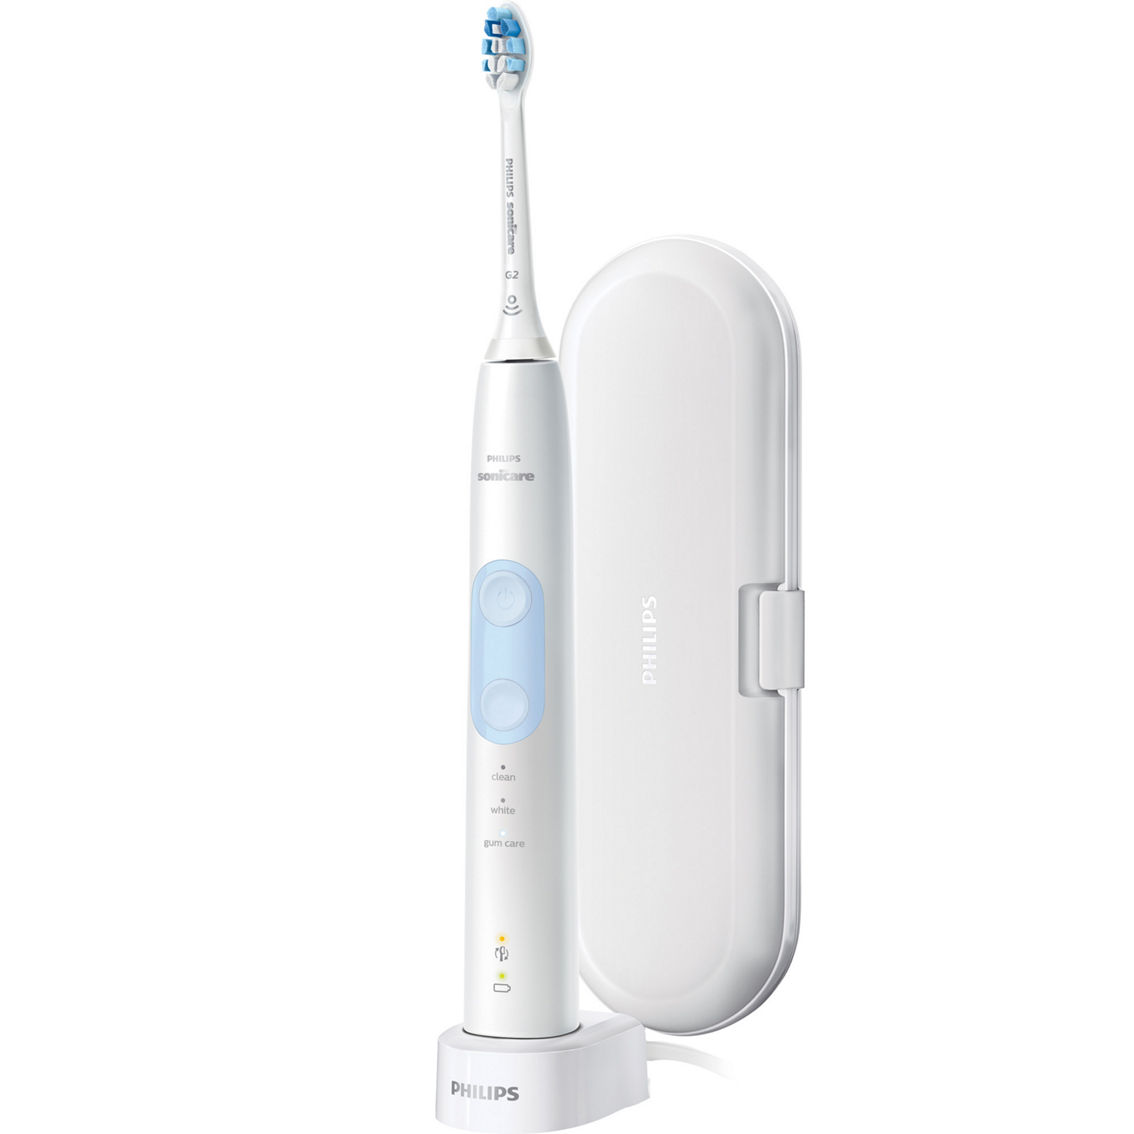 Philips Sonicare Protective Clean 5100 Electric Toothbrush with Bonus Brush Heads - Image 2 of 2